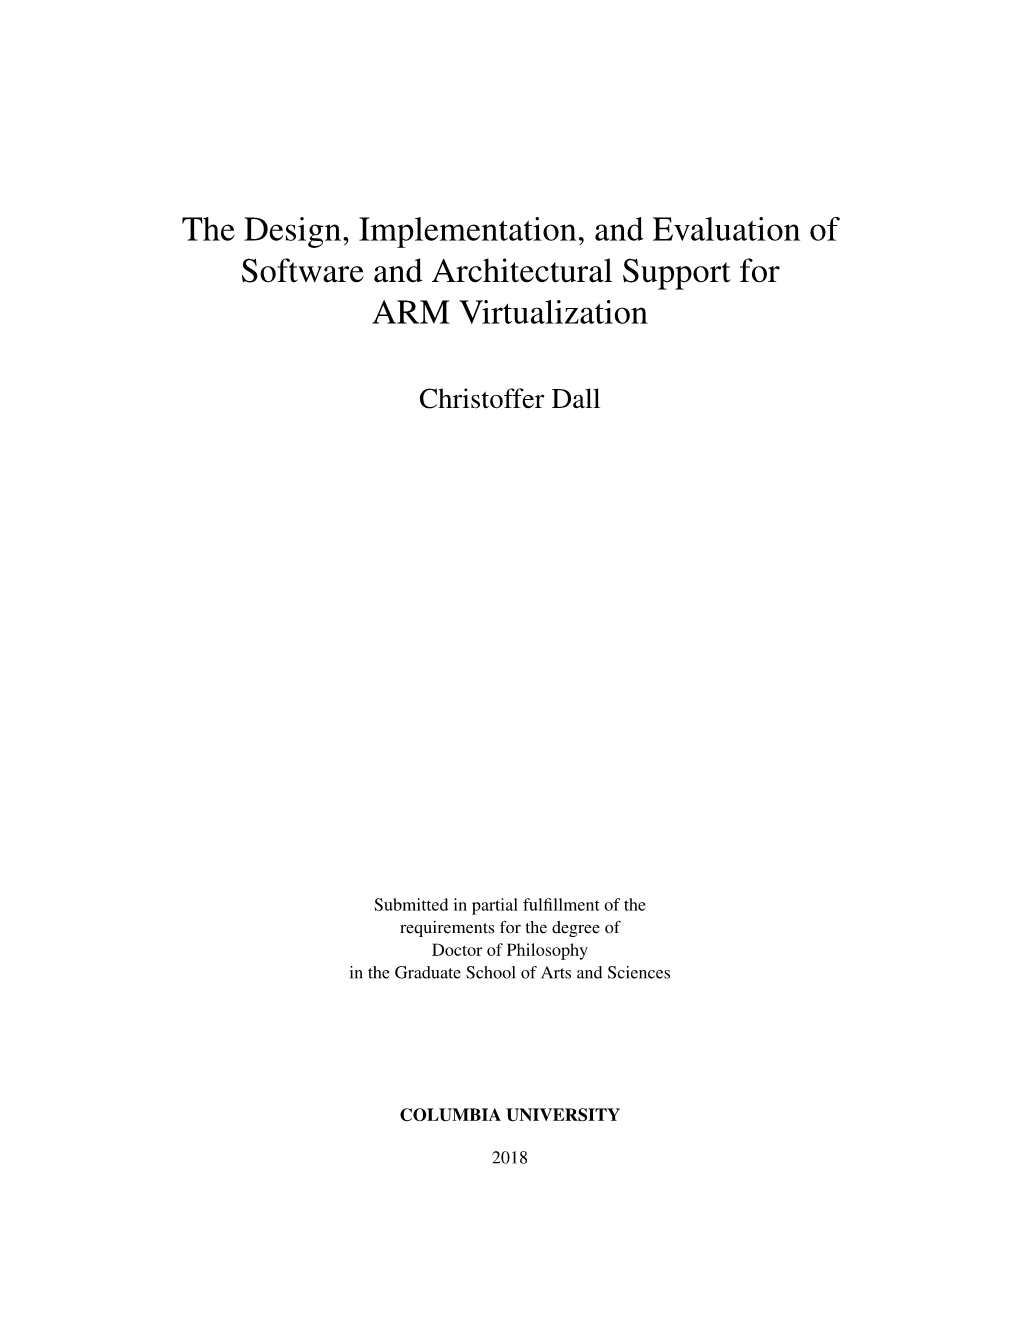 The Design, Implementation, and Evaluation of Software and Architectural Support for ARM Virtualization